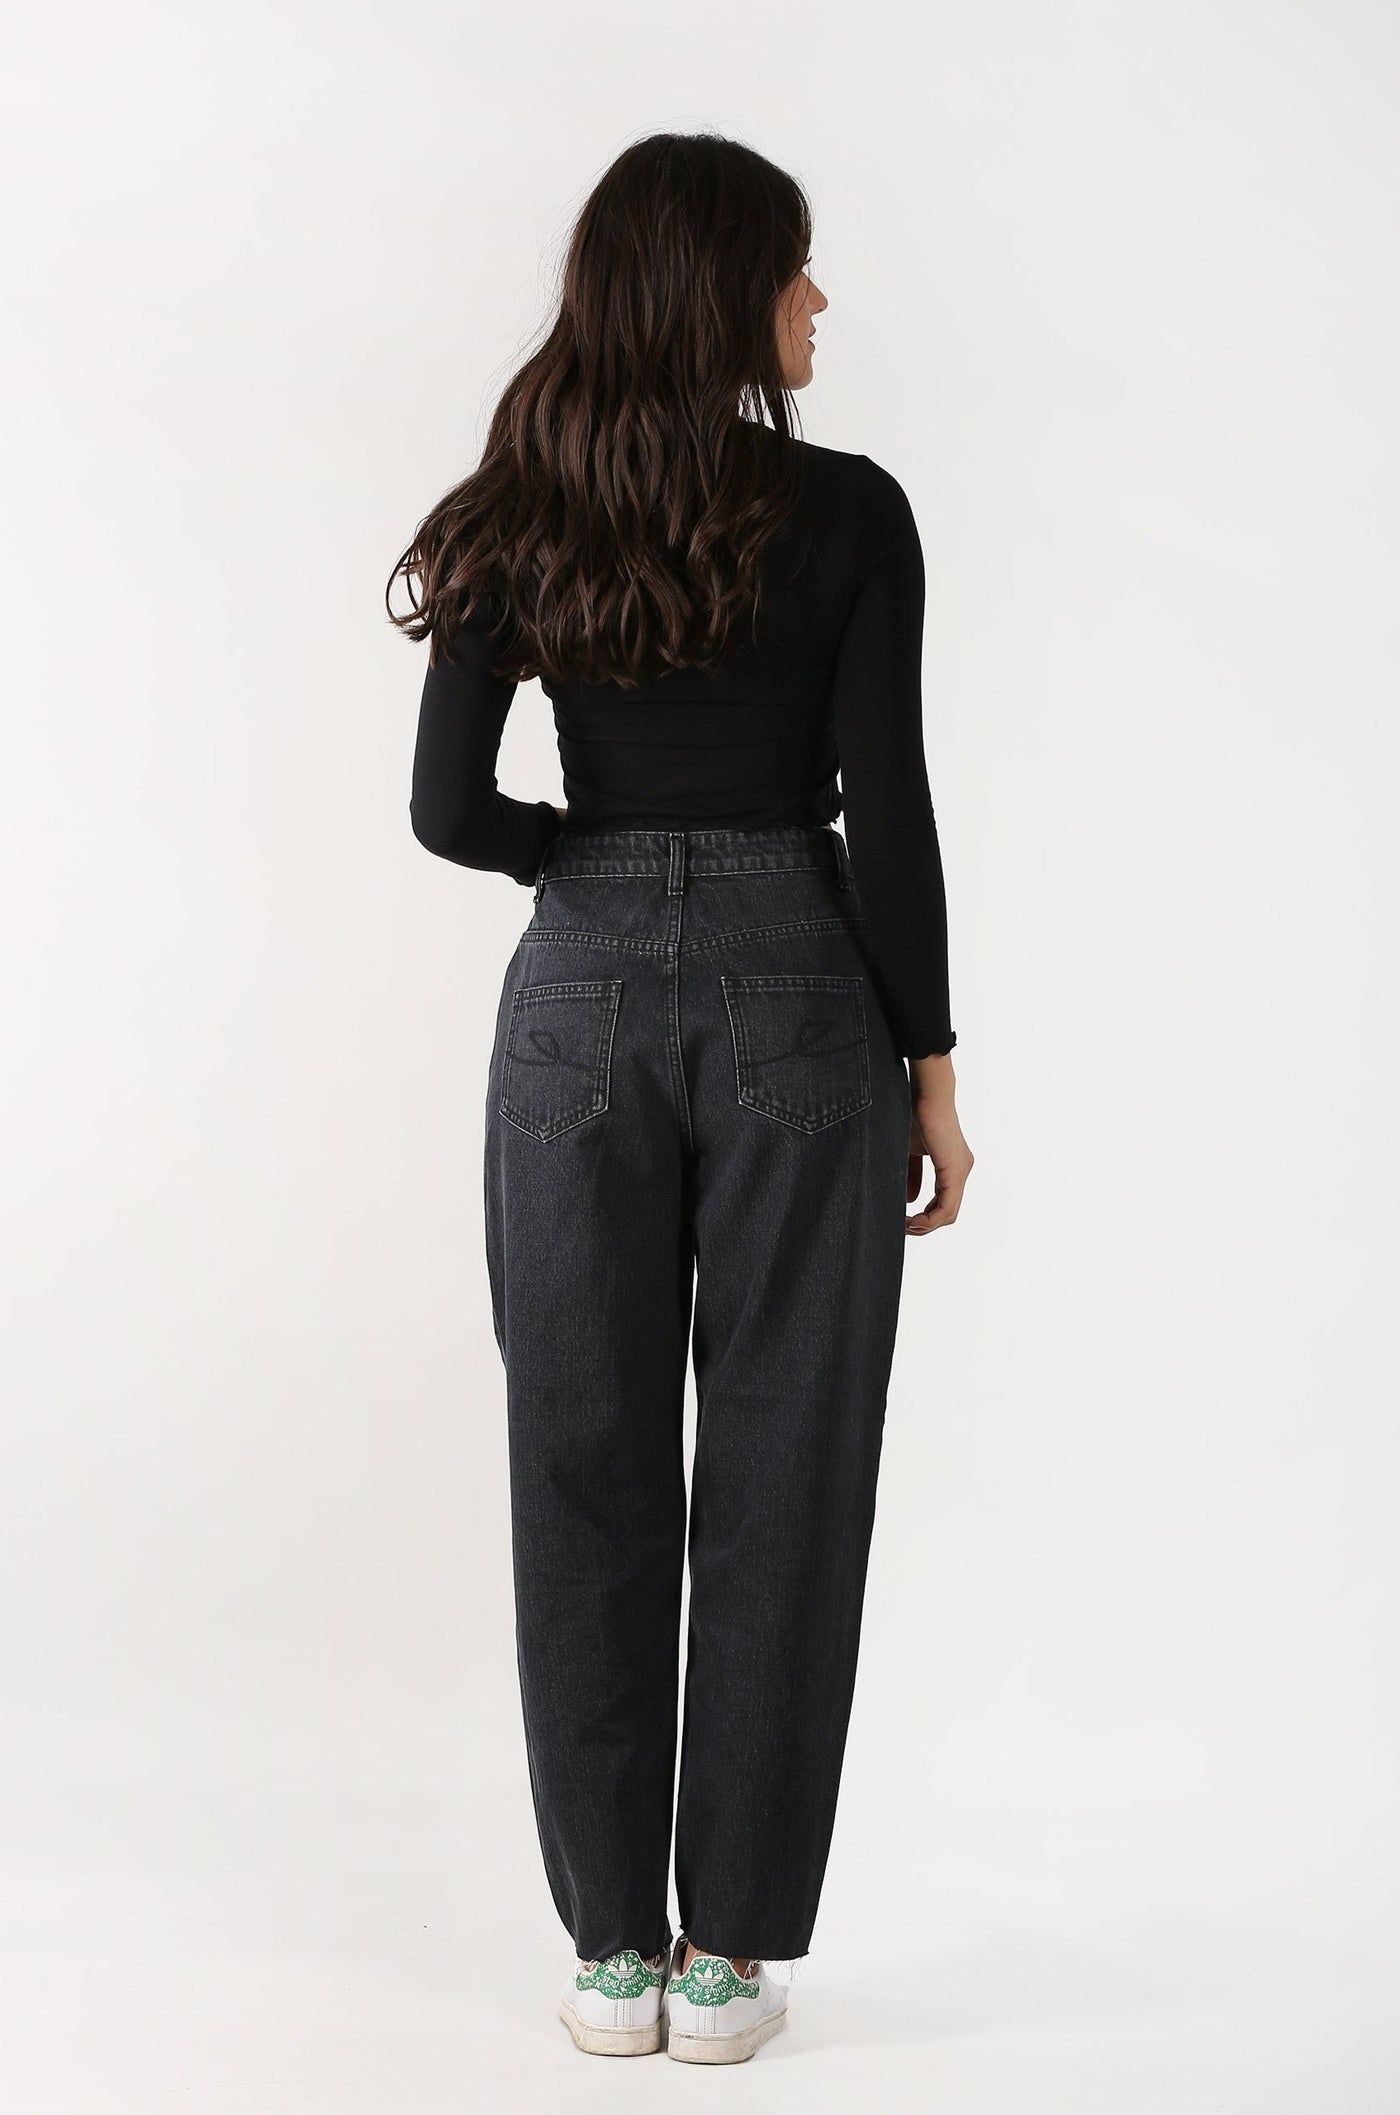 Sia Slouchy Jeans